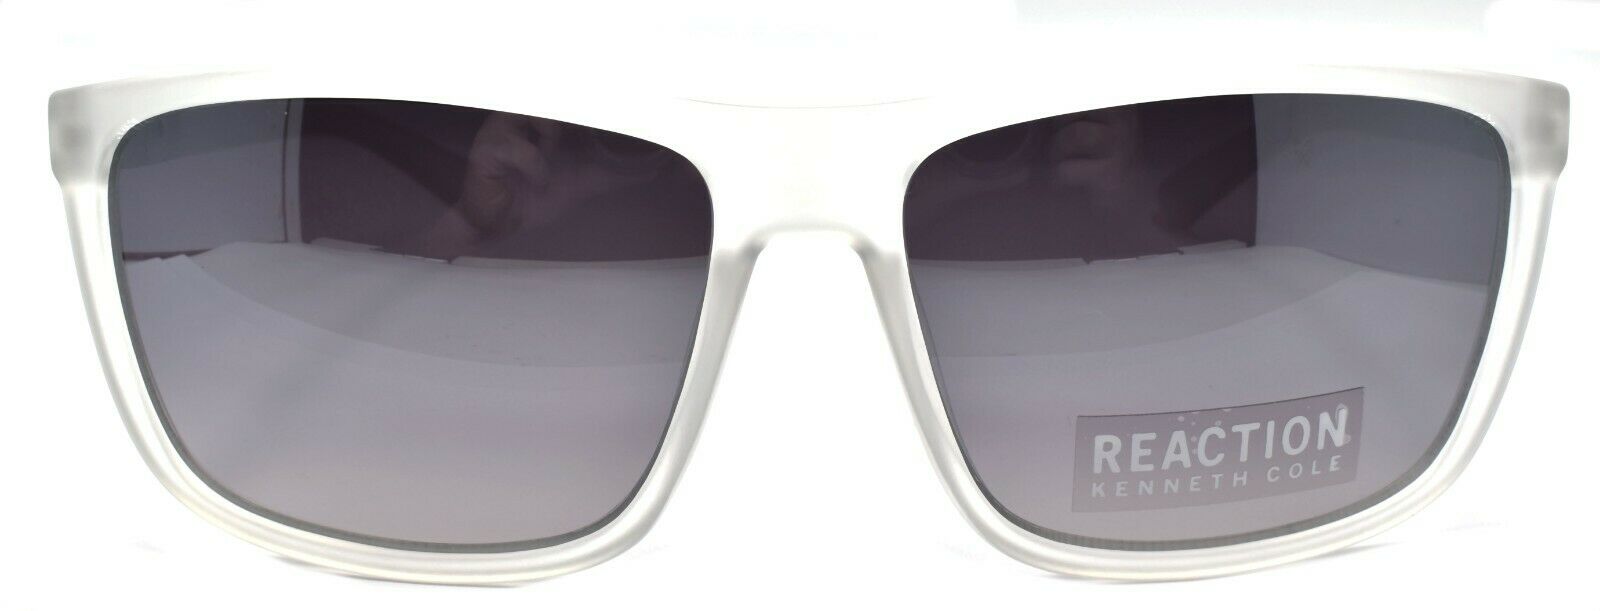 2-Kenneth Cole Reaction KC1317 27C Men's Sunglasses 59-15-140 Crystal / Mirrored-664689987771-IKSpecs